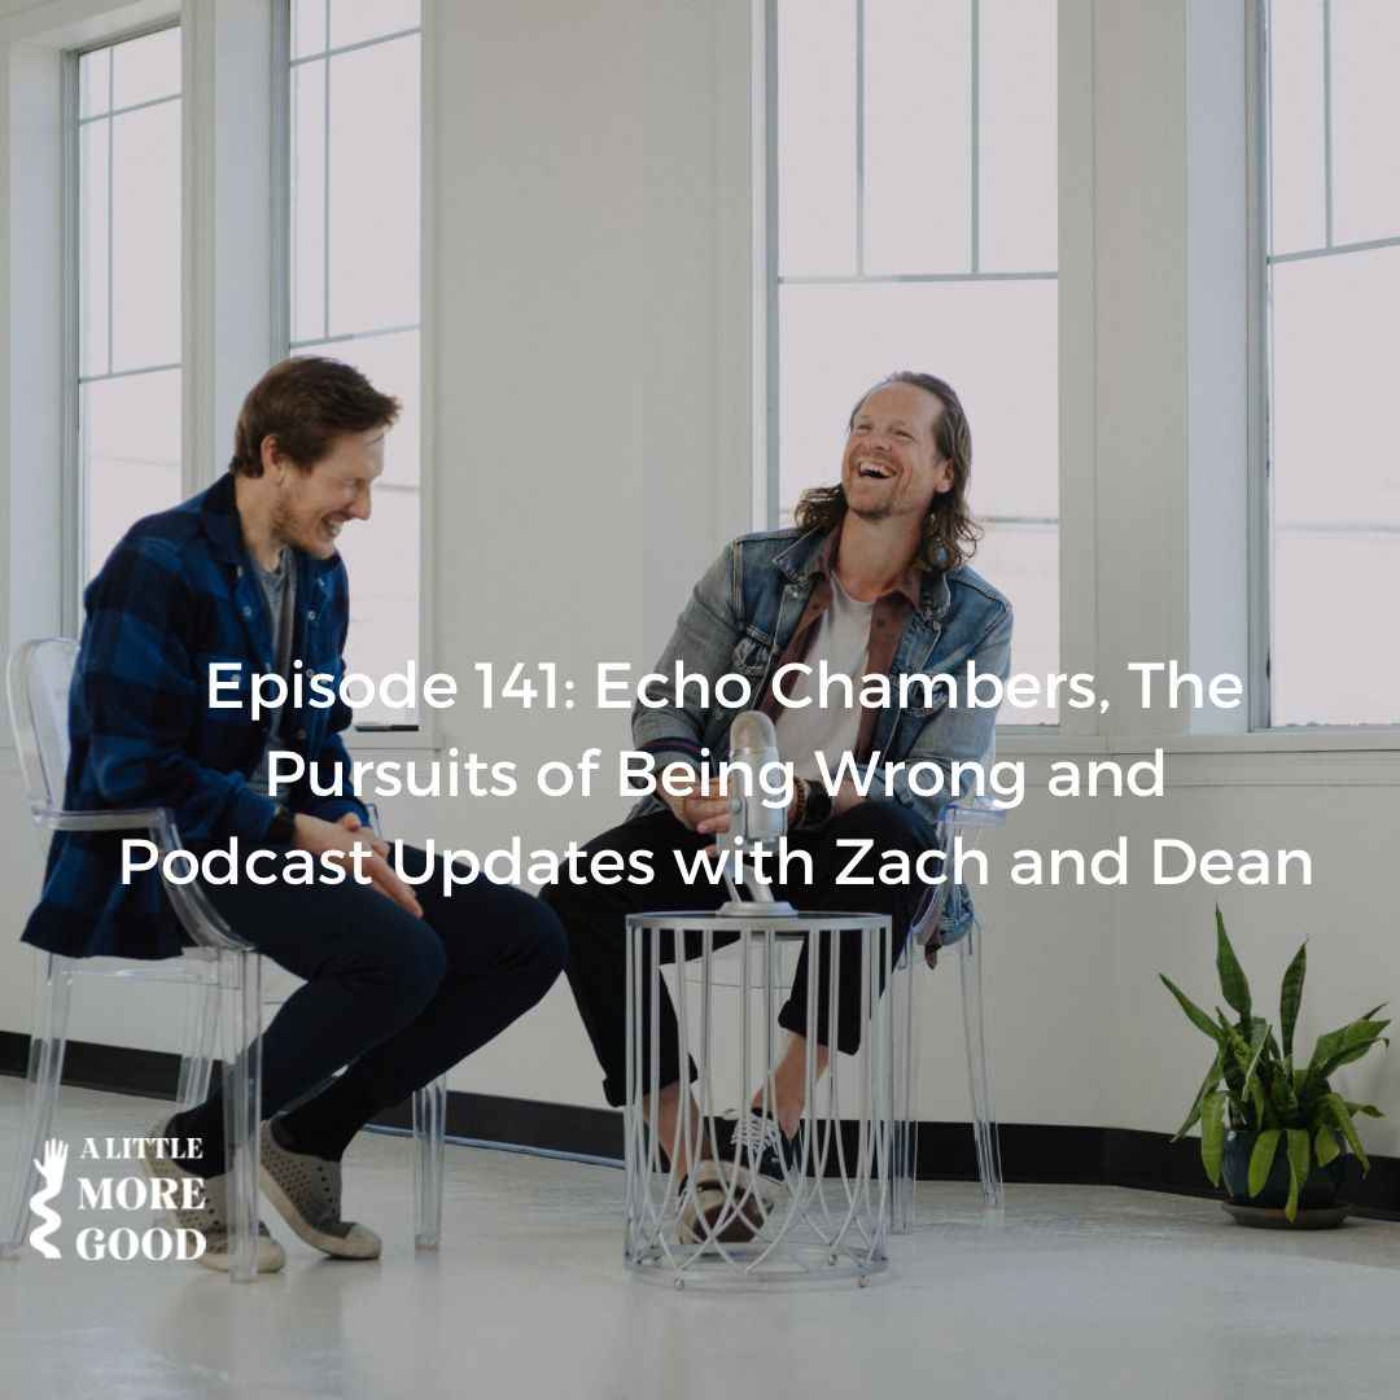 Echo Chambers, the pursuit of being wrong, and Podcast updates with Zach & Dean